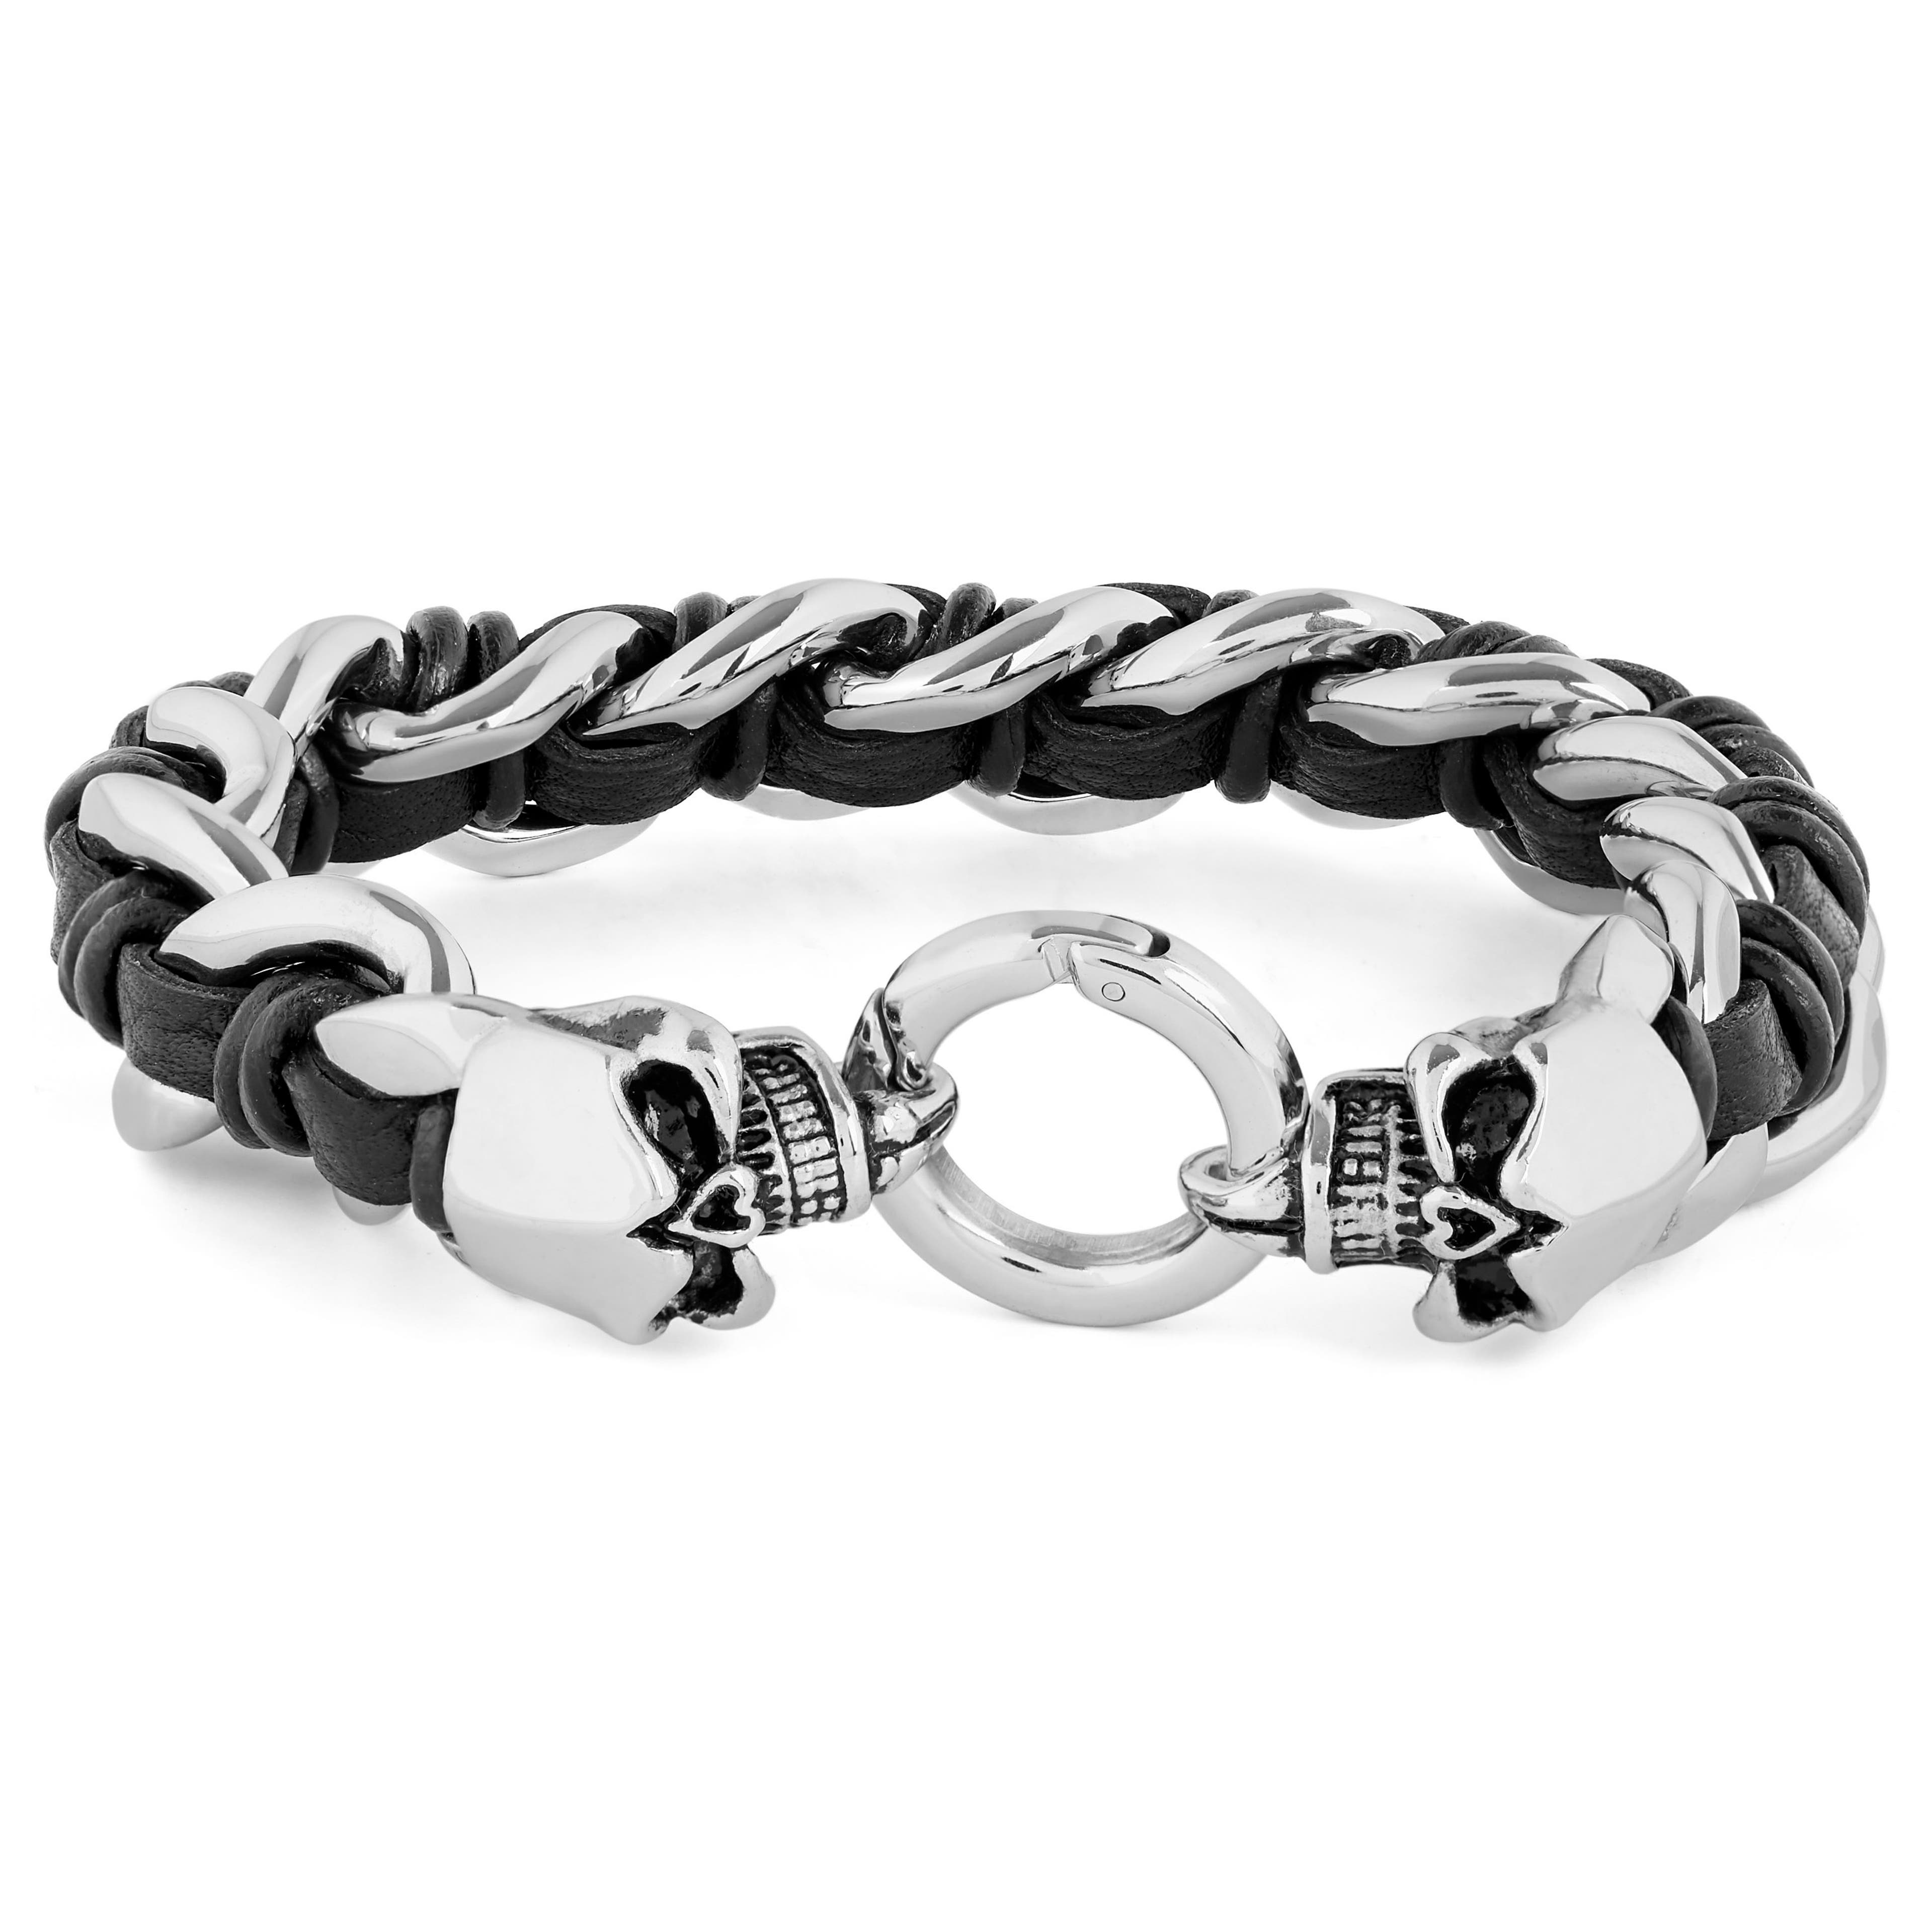 Hammered Silver Chain and Black Leather Bracelet Men - Think-Positive